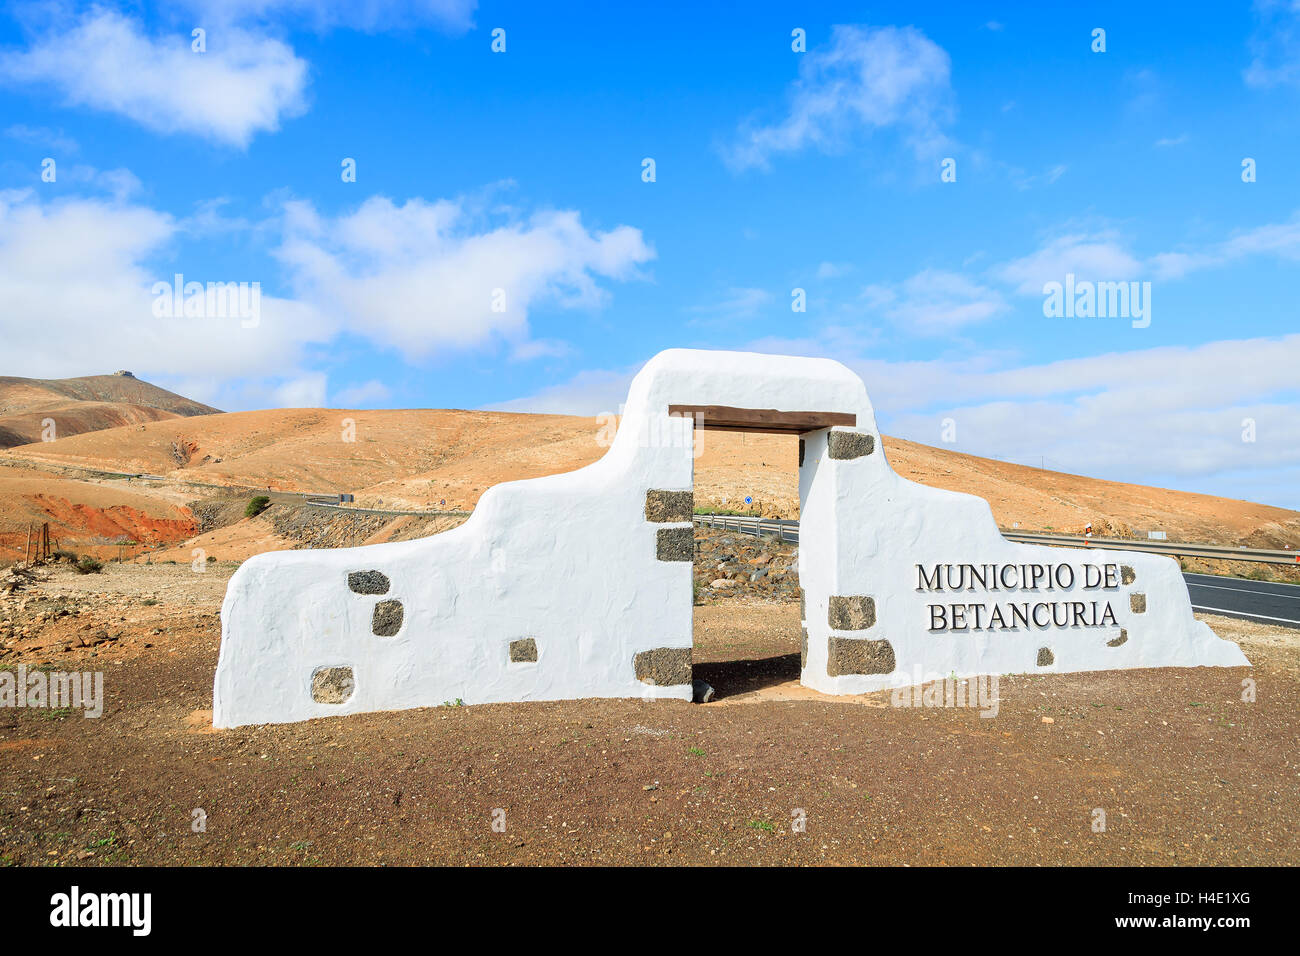 Traditionall municipality sign (white arch gate) near Betancuria village with desert landscape in the background, Fuerteventura, Canary Islands, Spain Stock Photo